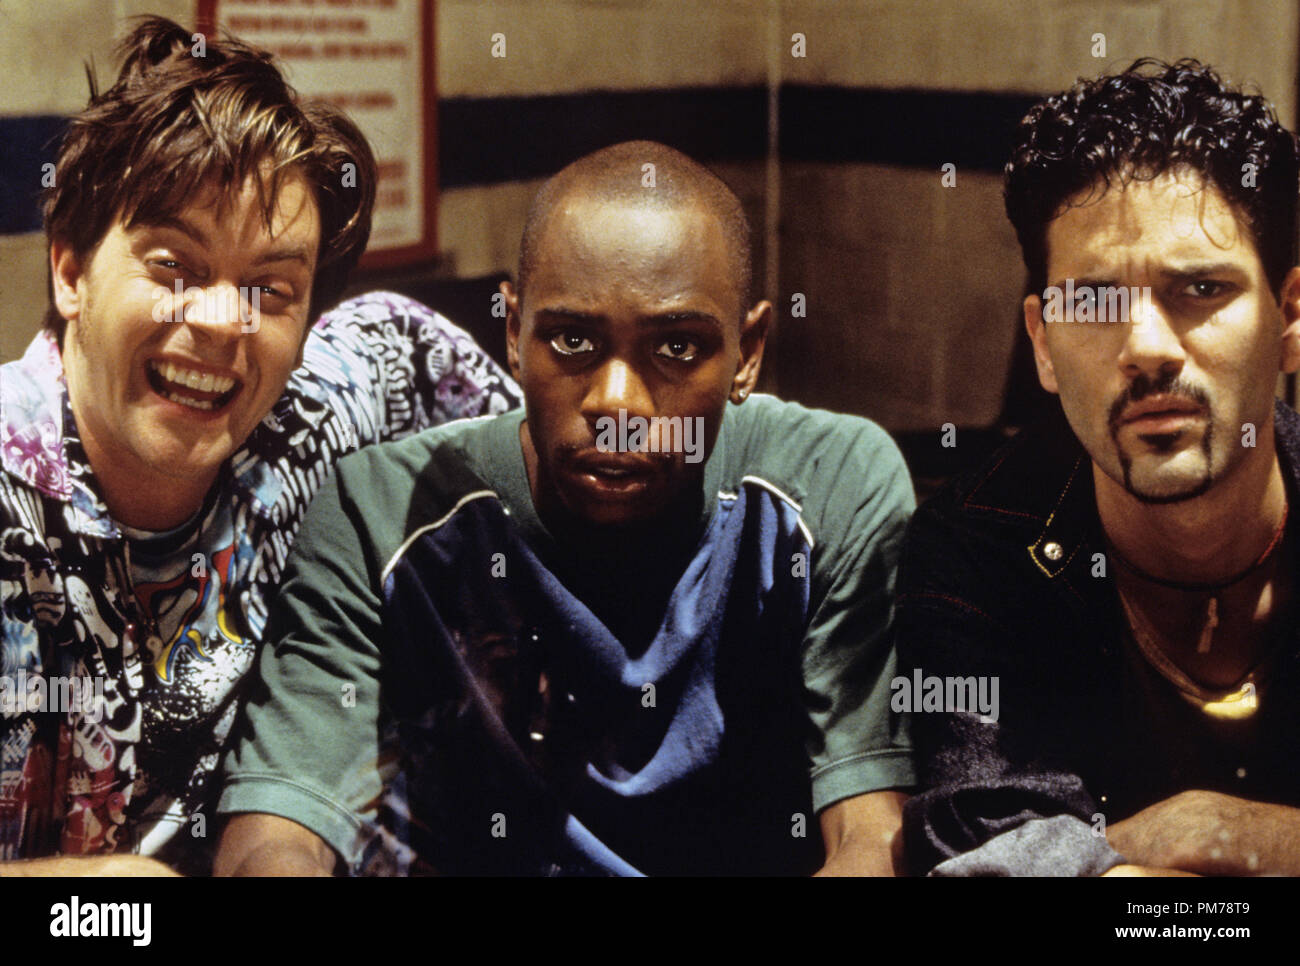 Film Still from 'Half Baked' Jim Breuer, Dave Chappelle, Guillermo Diaz © 1998 Universal Photo Credit: Timothy White   File Reference # 30996510THA  For Editorial Use Only -  All Rights Reserved Stock Photo